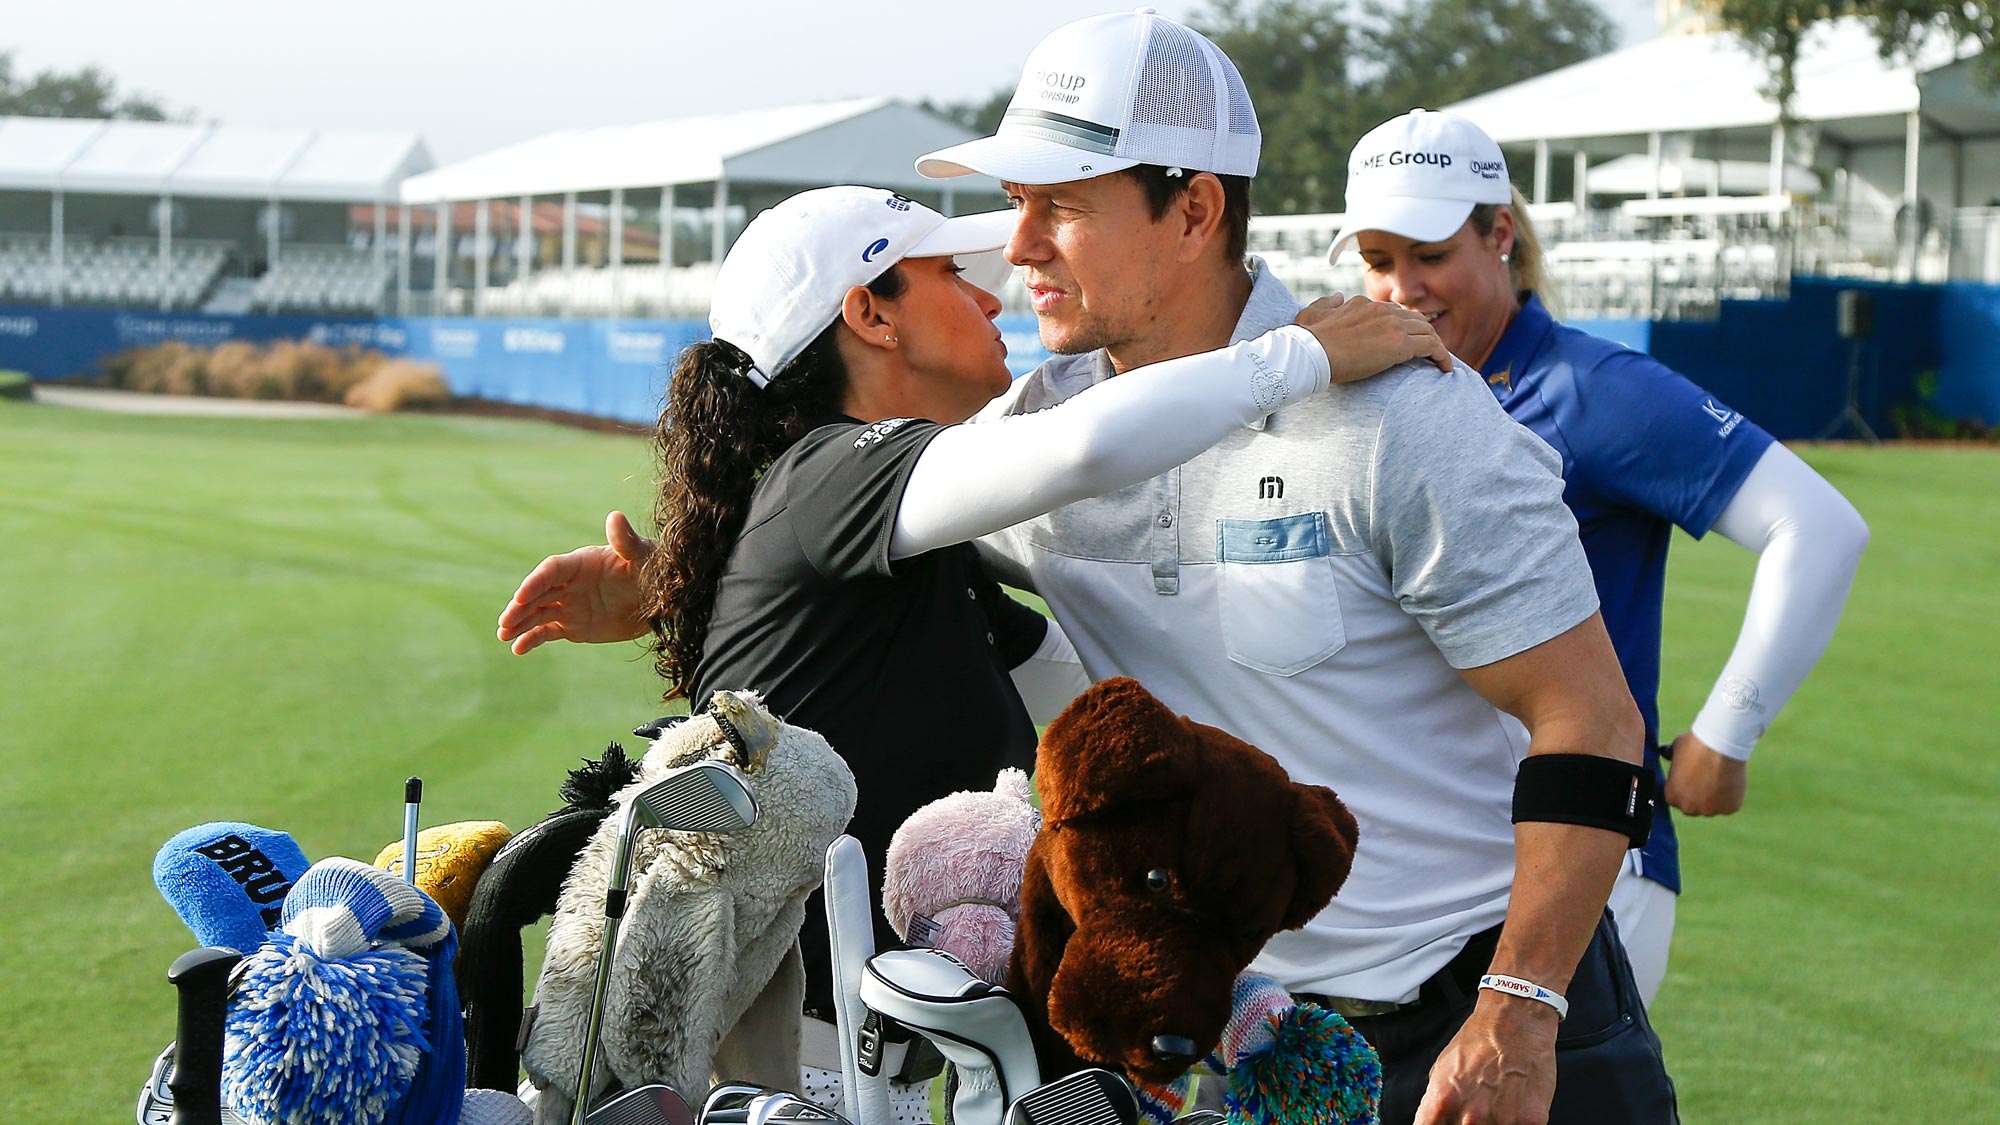 Actor Mark Wahlberg greets LPGA golfer Mo Martin prior to the CME Group charity event to benefit St. Jude Children's Research Hospital prior to the LPGA CME Group Tour Championship